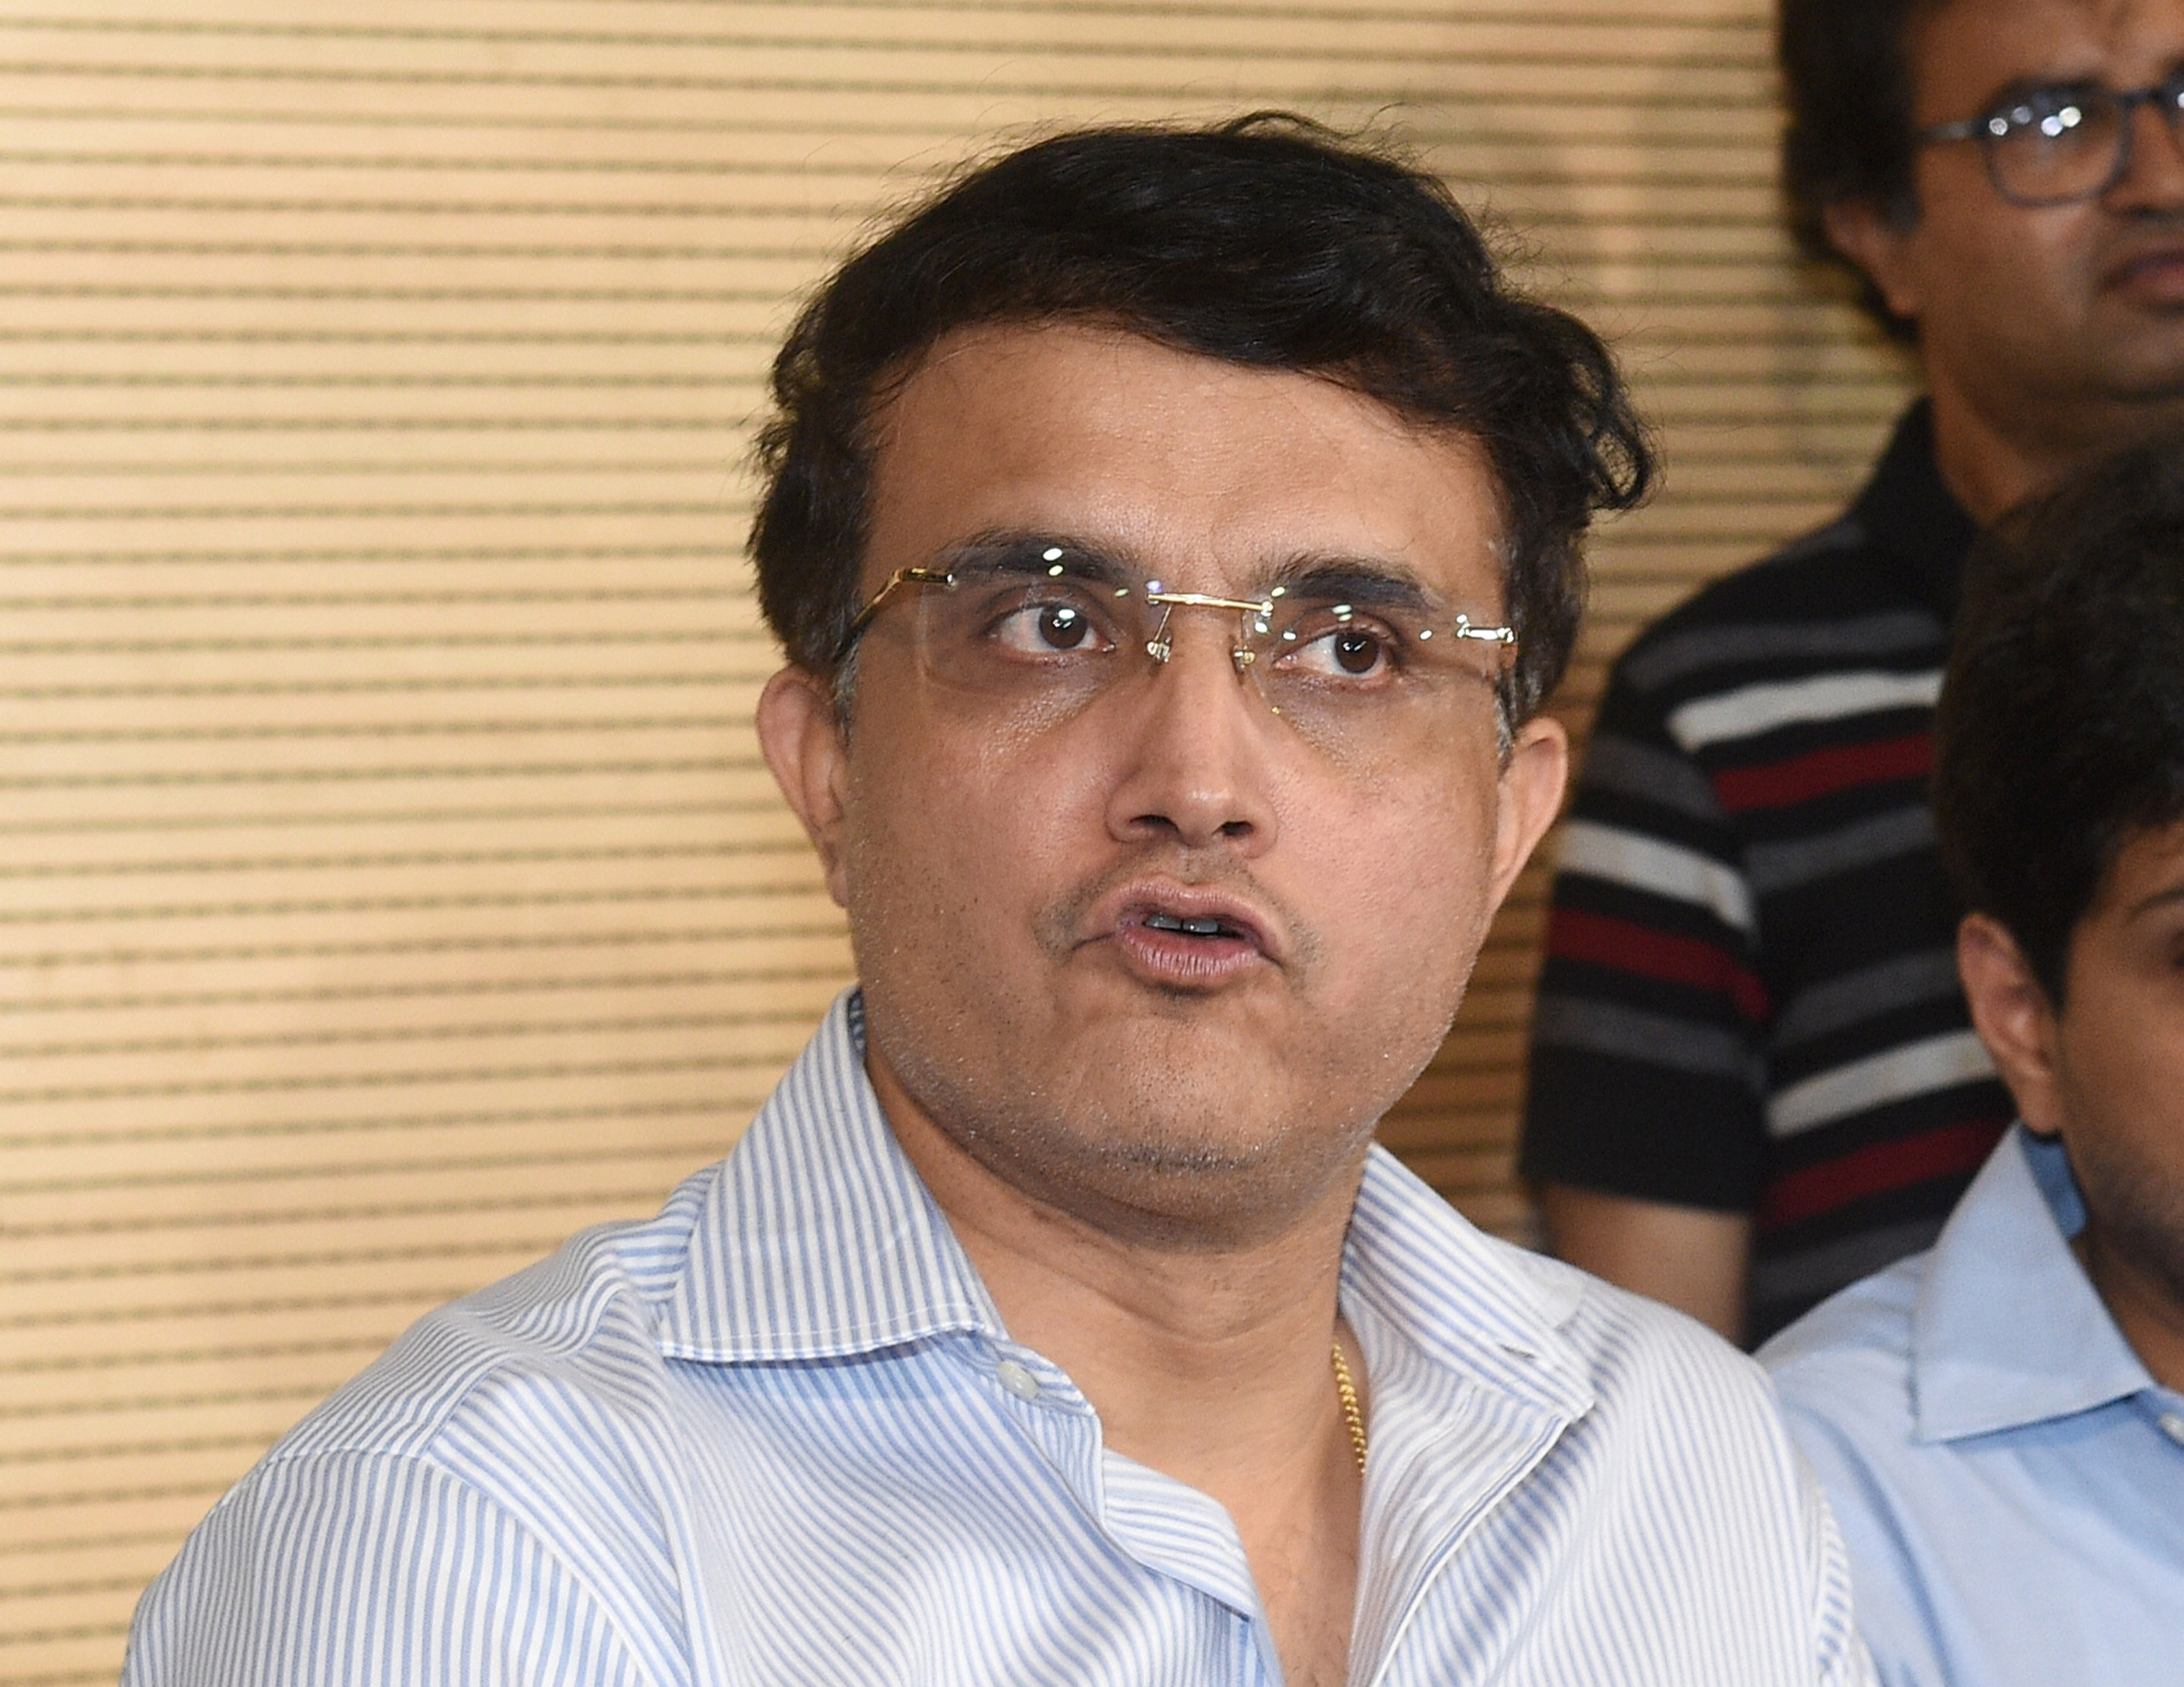 Sourav Ganguly, BCCI president, cricketer, Board of Control for Cricket in India, politics, BJP, elections, Amit Shah meeting, Amit Shahs son, Jay Shah, secretary of BCCI